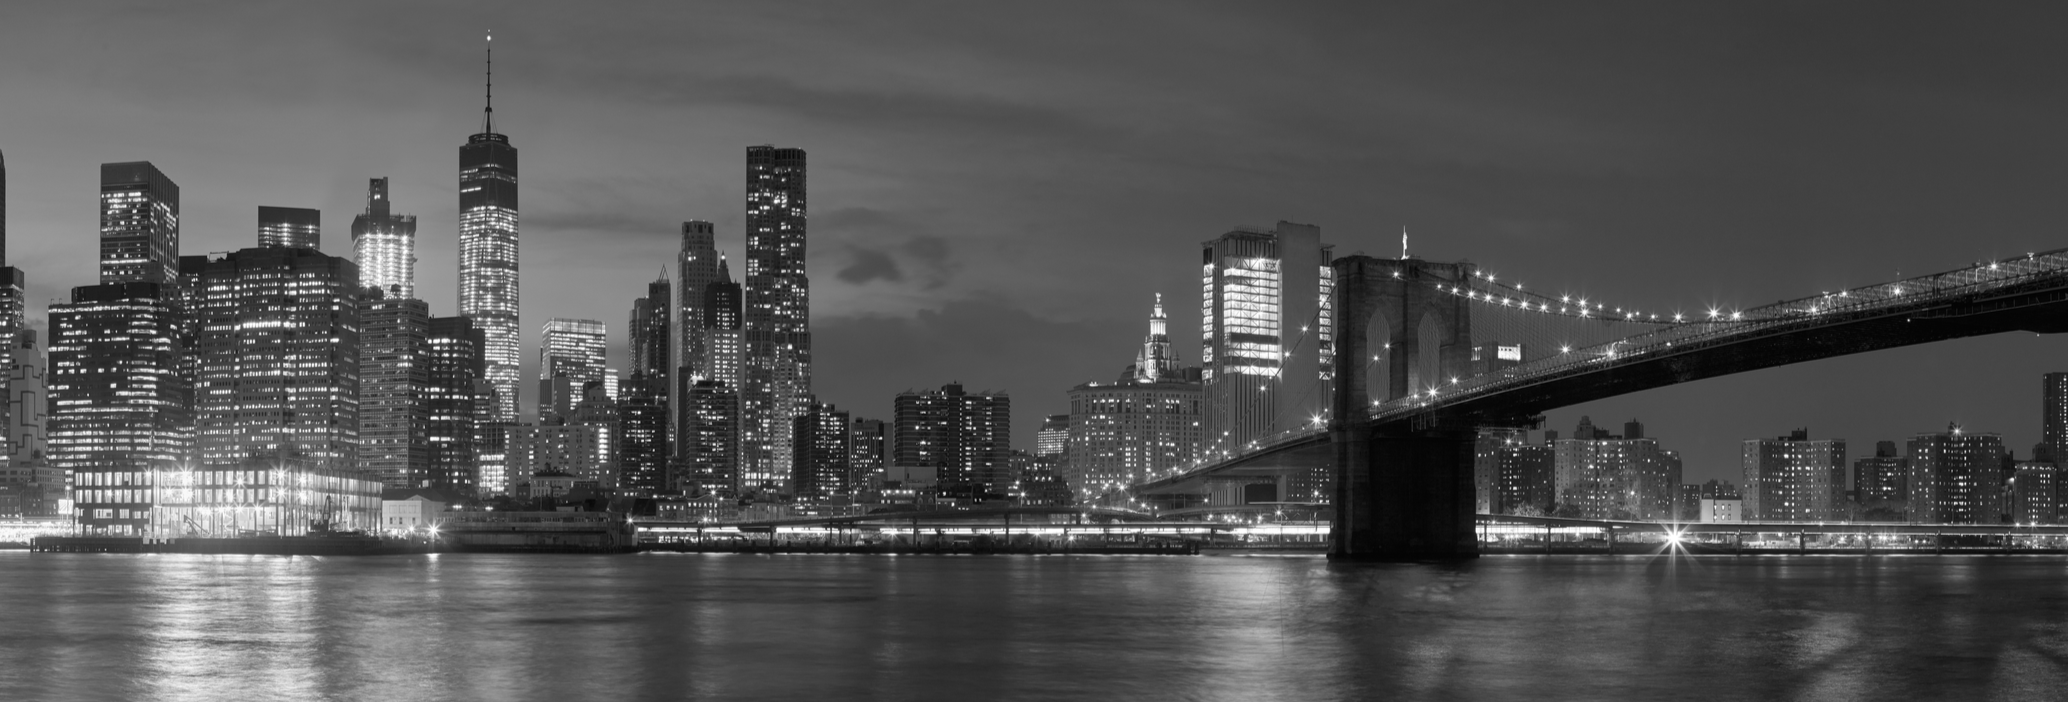 New York City With Brooklyn Bridge Iconic Skyline Panorama At Night In Black And White Table Wrap Rm Wraps